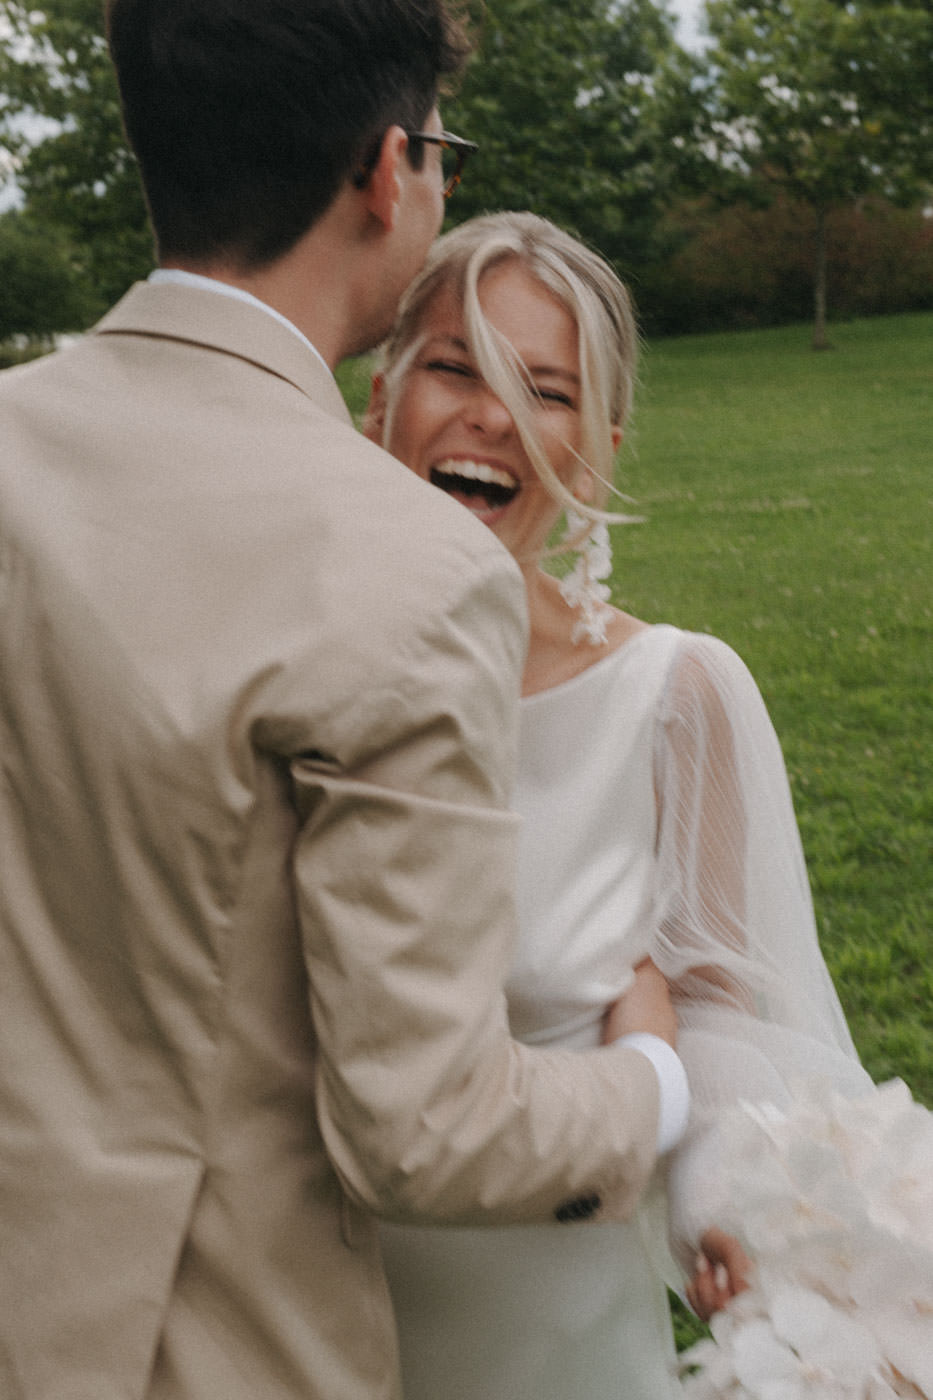 Close-up of a laughing bride embraced by groom outdoors, sharing a joyful, intimate moment